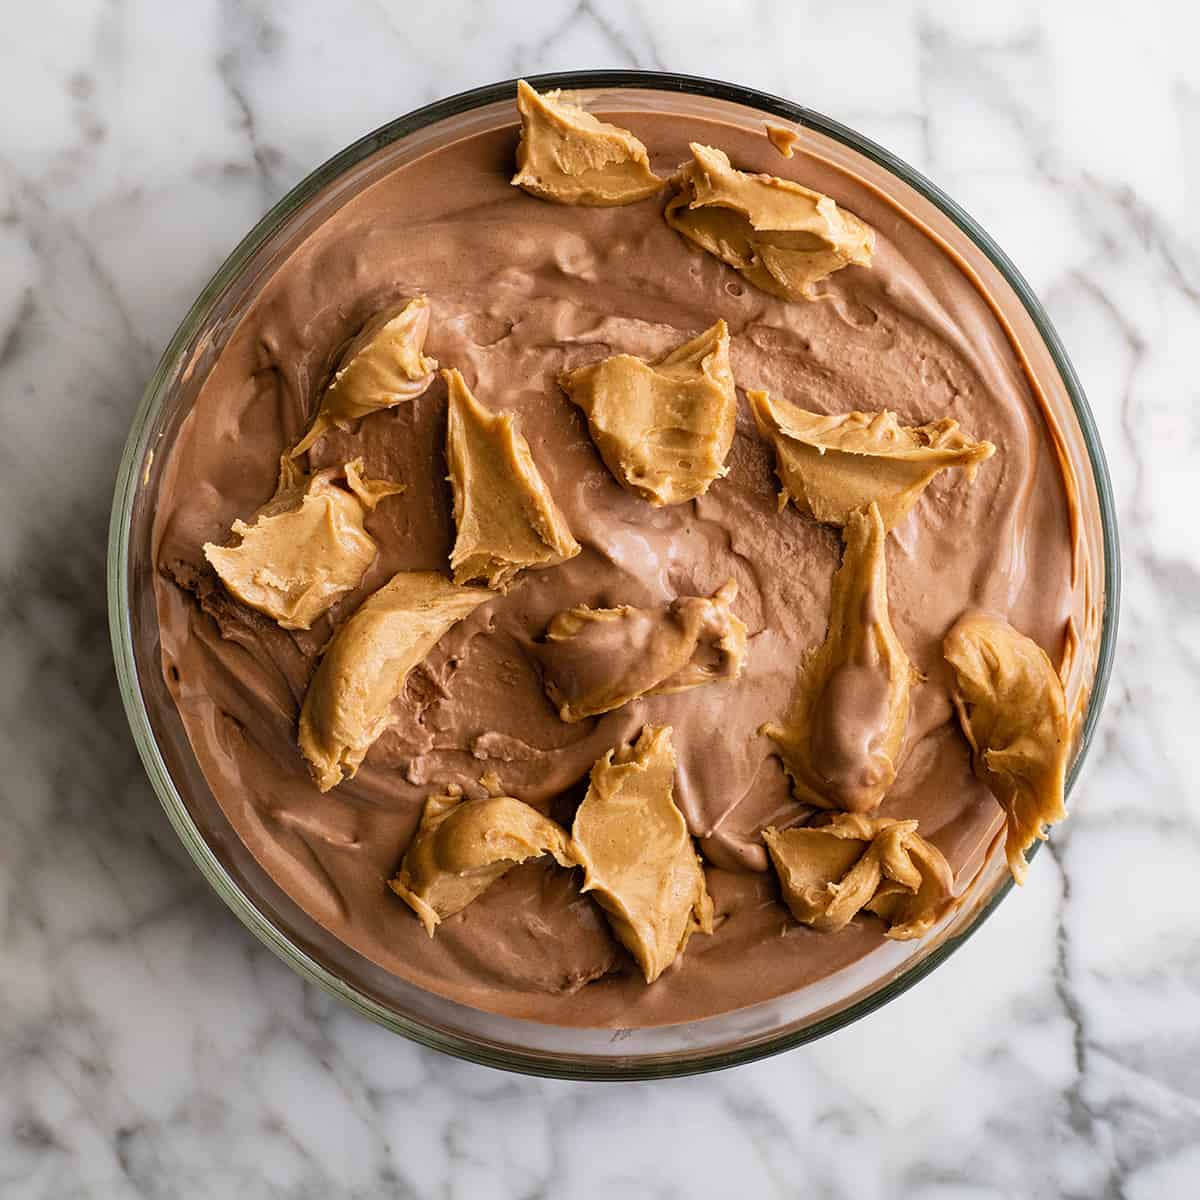 assembled Chocolate Peanut Butter Ice Cream in a glass bowl before freezing